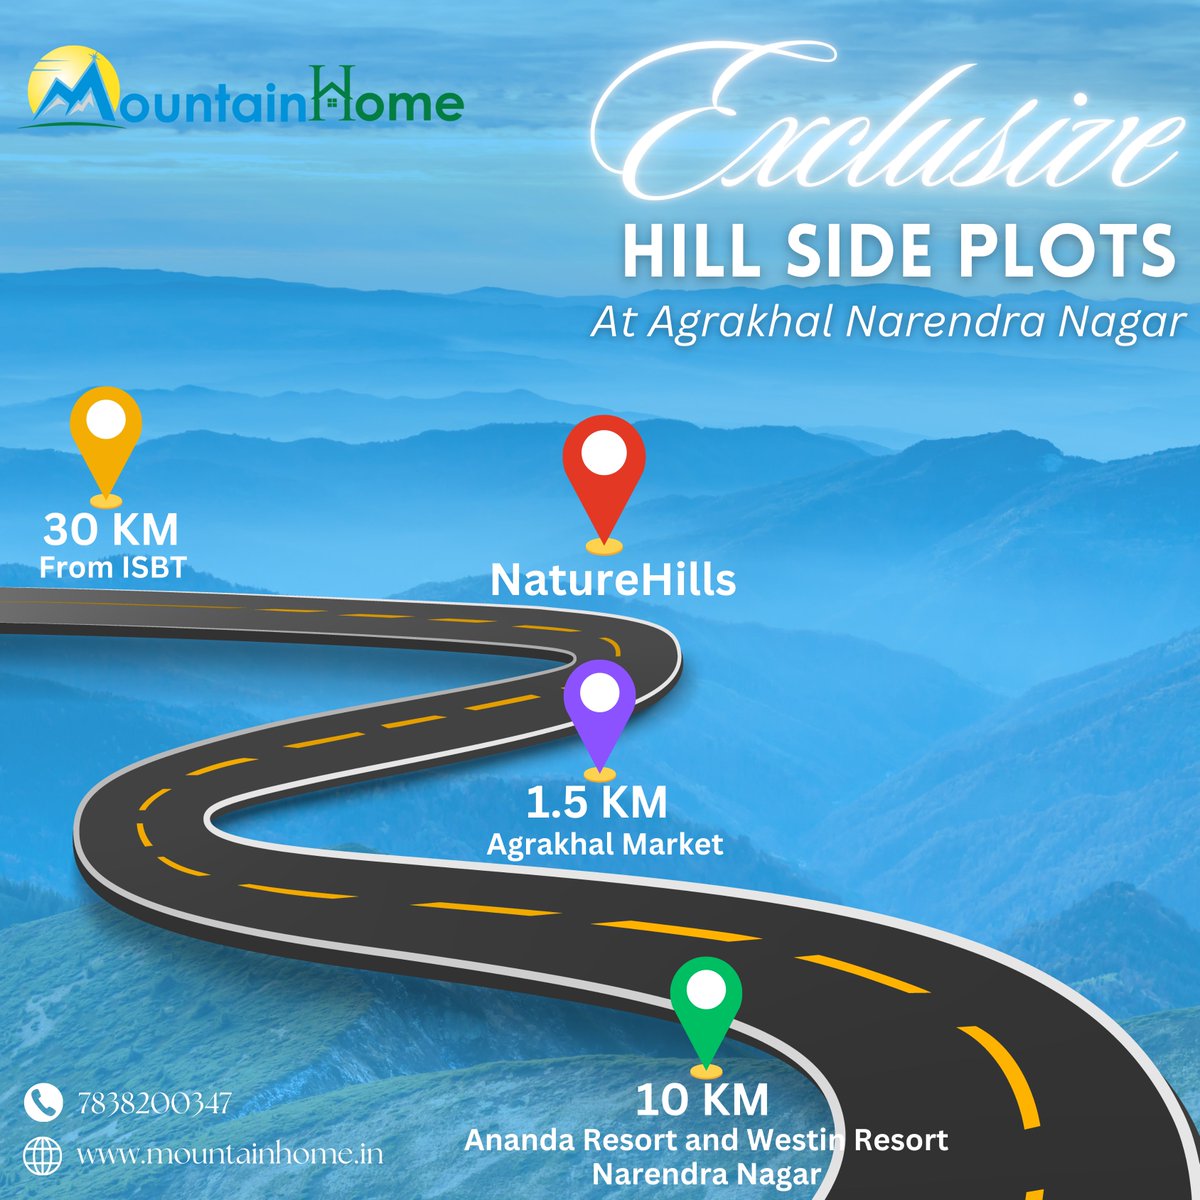 'Unlock the serenity of hillside living 🌄 Embrace nature's tranquility 🌿 Experience breathtaking views every day 🌅 Invest in your own piece of paradise 🏞️ Discover the joys of hilltop living 🏡 #HillsideLiving #NatureRetreat #BreathtakingViews #PropertyInvestment.